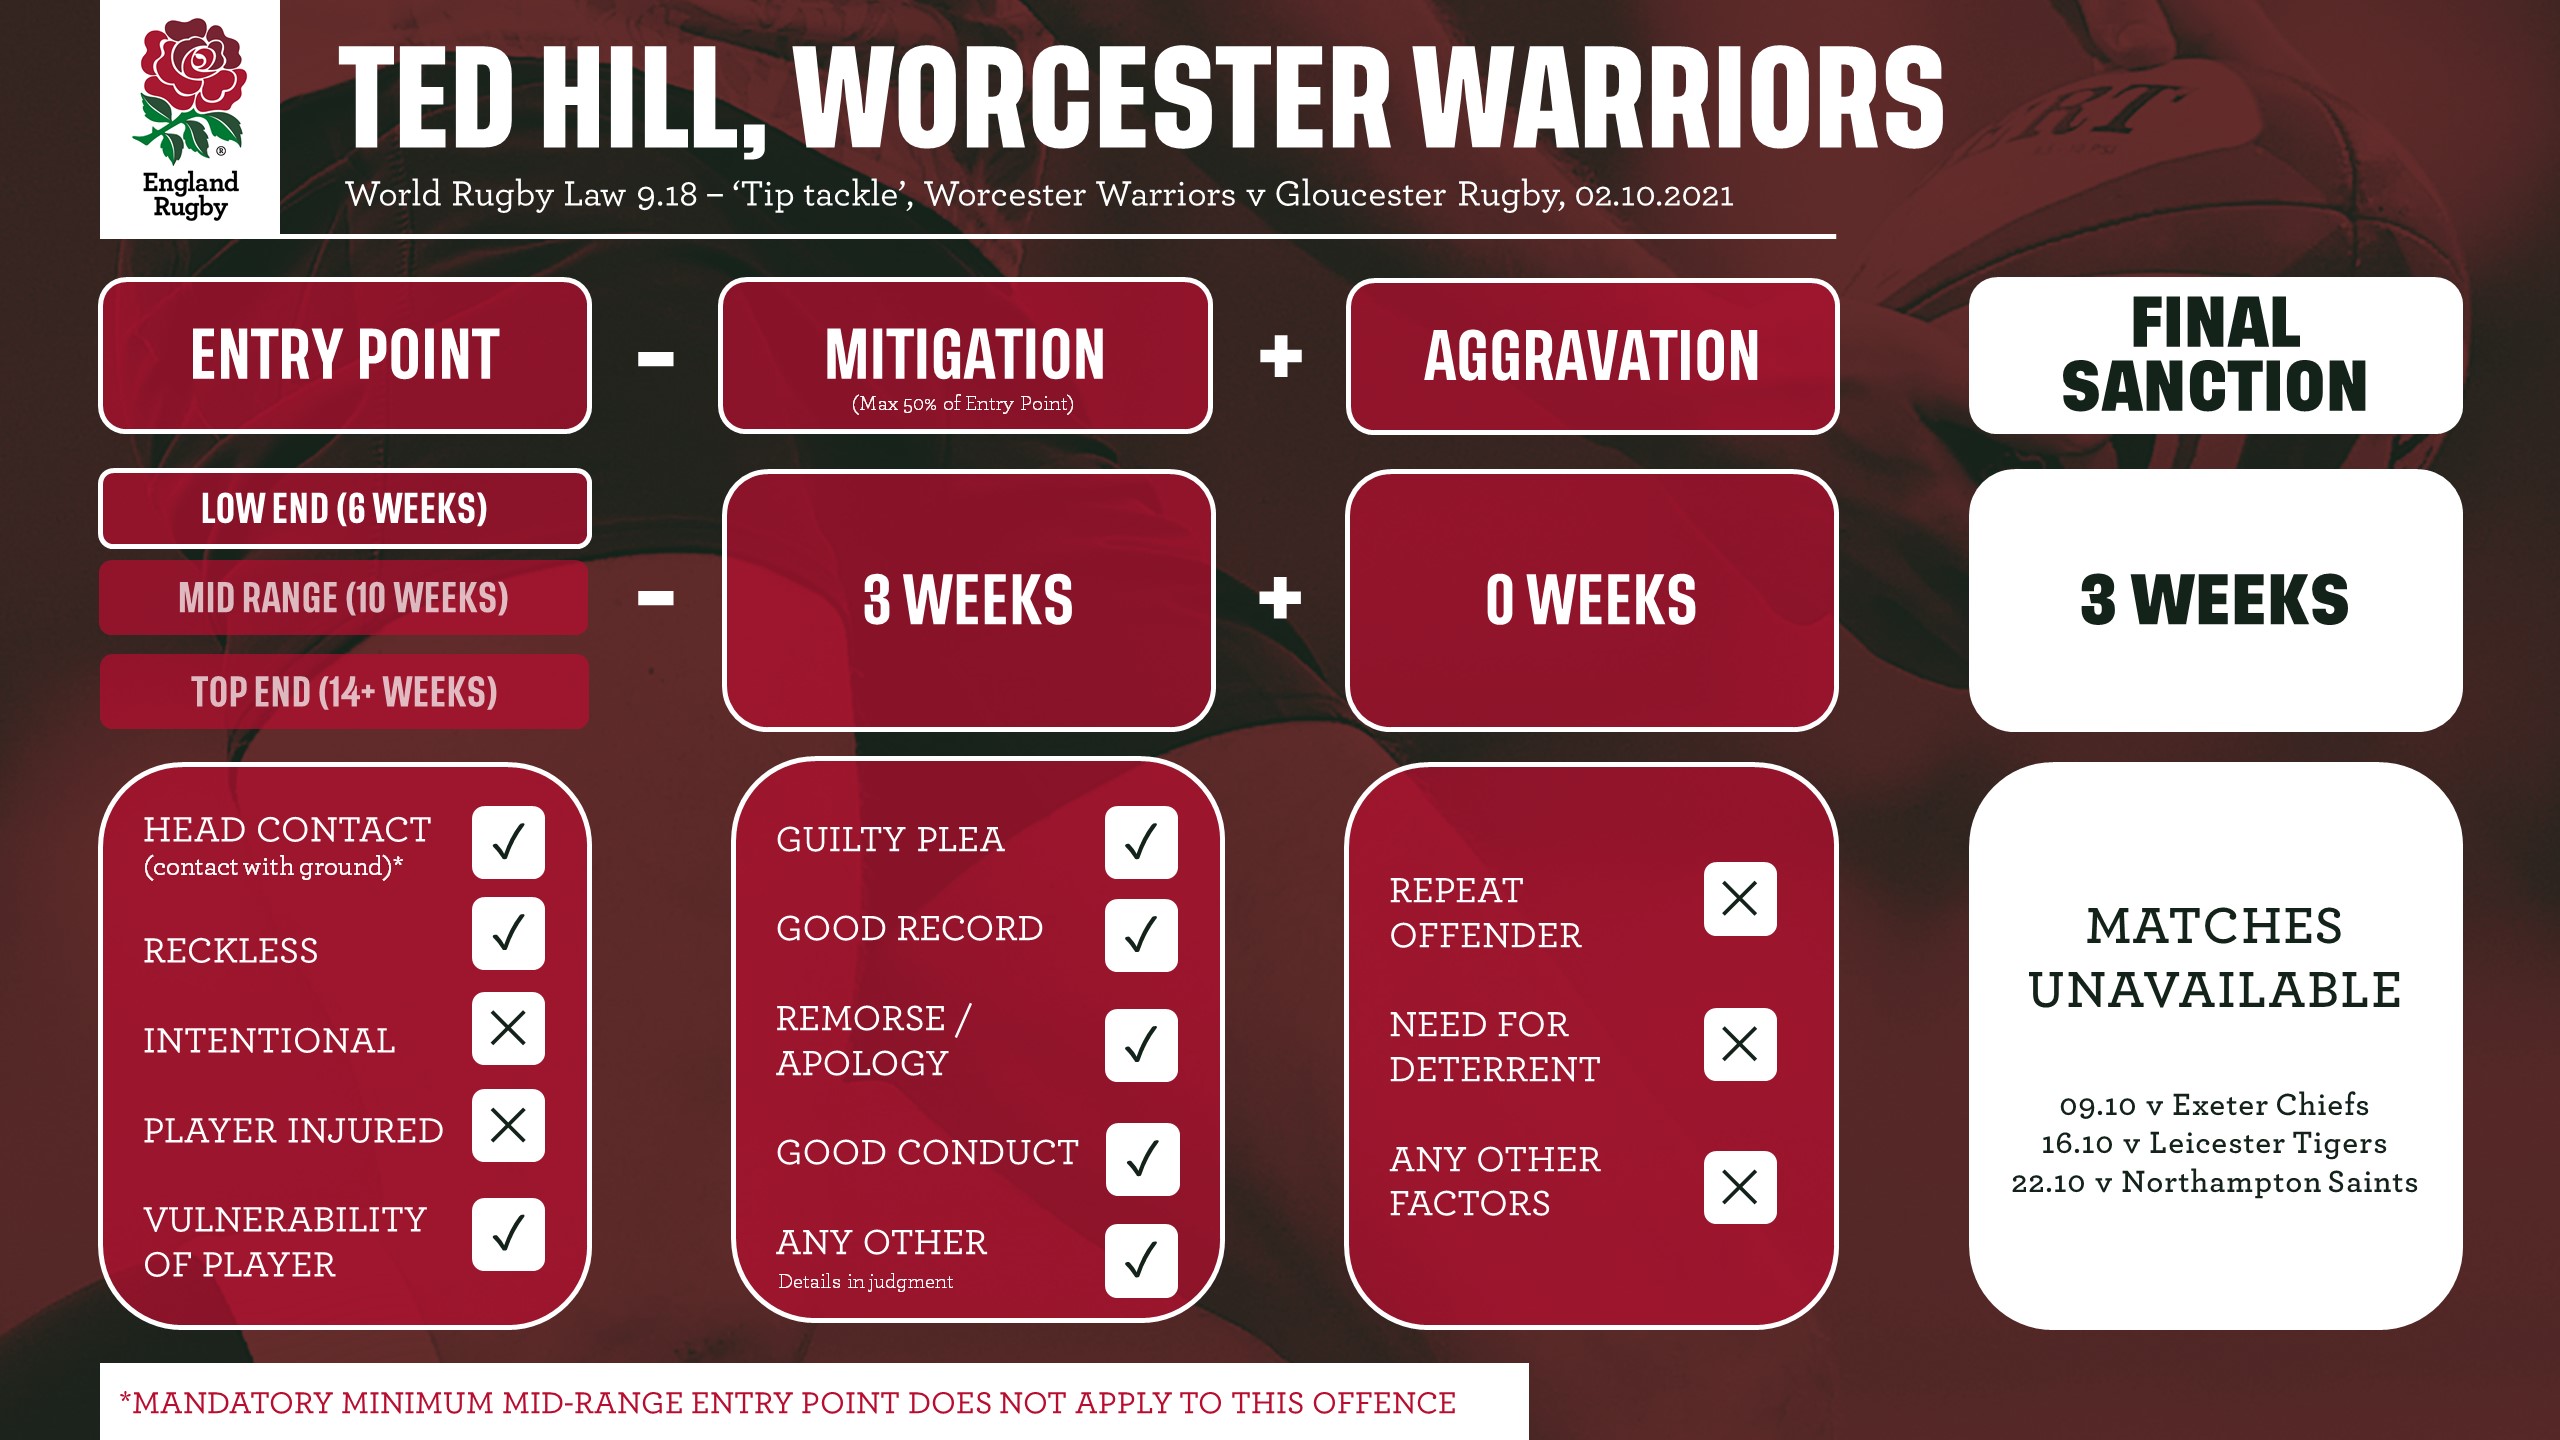 Ted%20Hill%2C%20Worcester%20Warriors.jpg